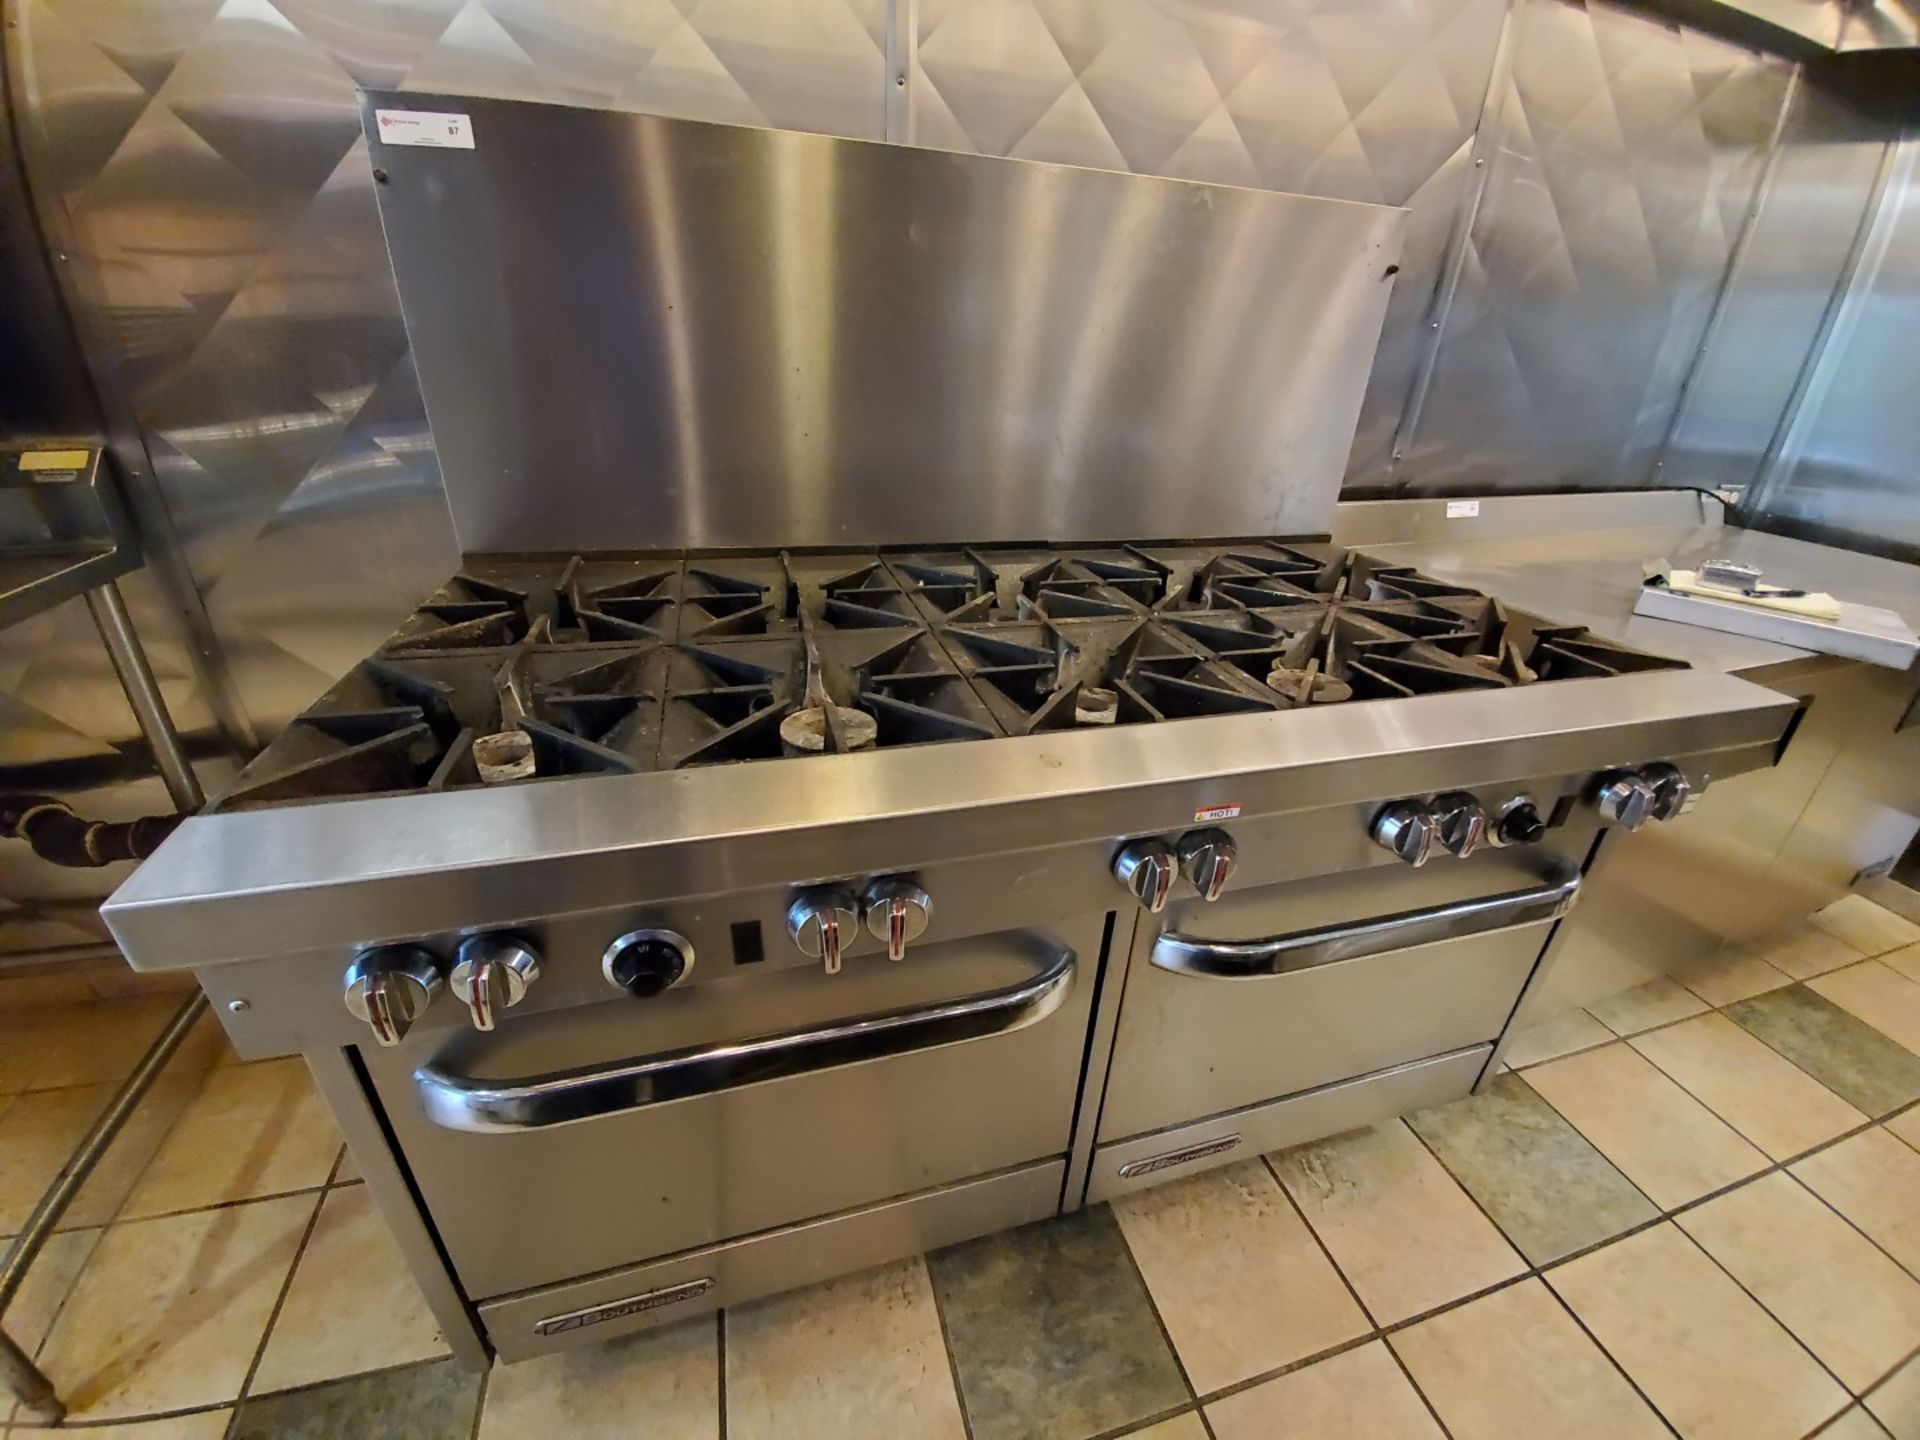 Southbend Station Range/Oven, with 60" long x 27" wide x 37" high cook top, (10) burners, gas fired,